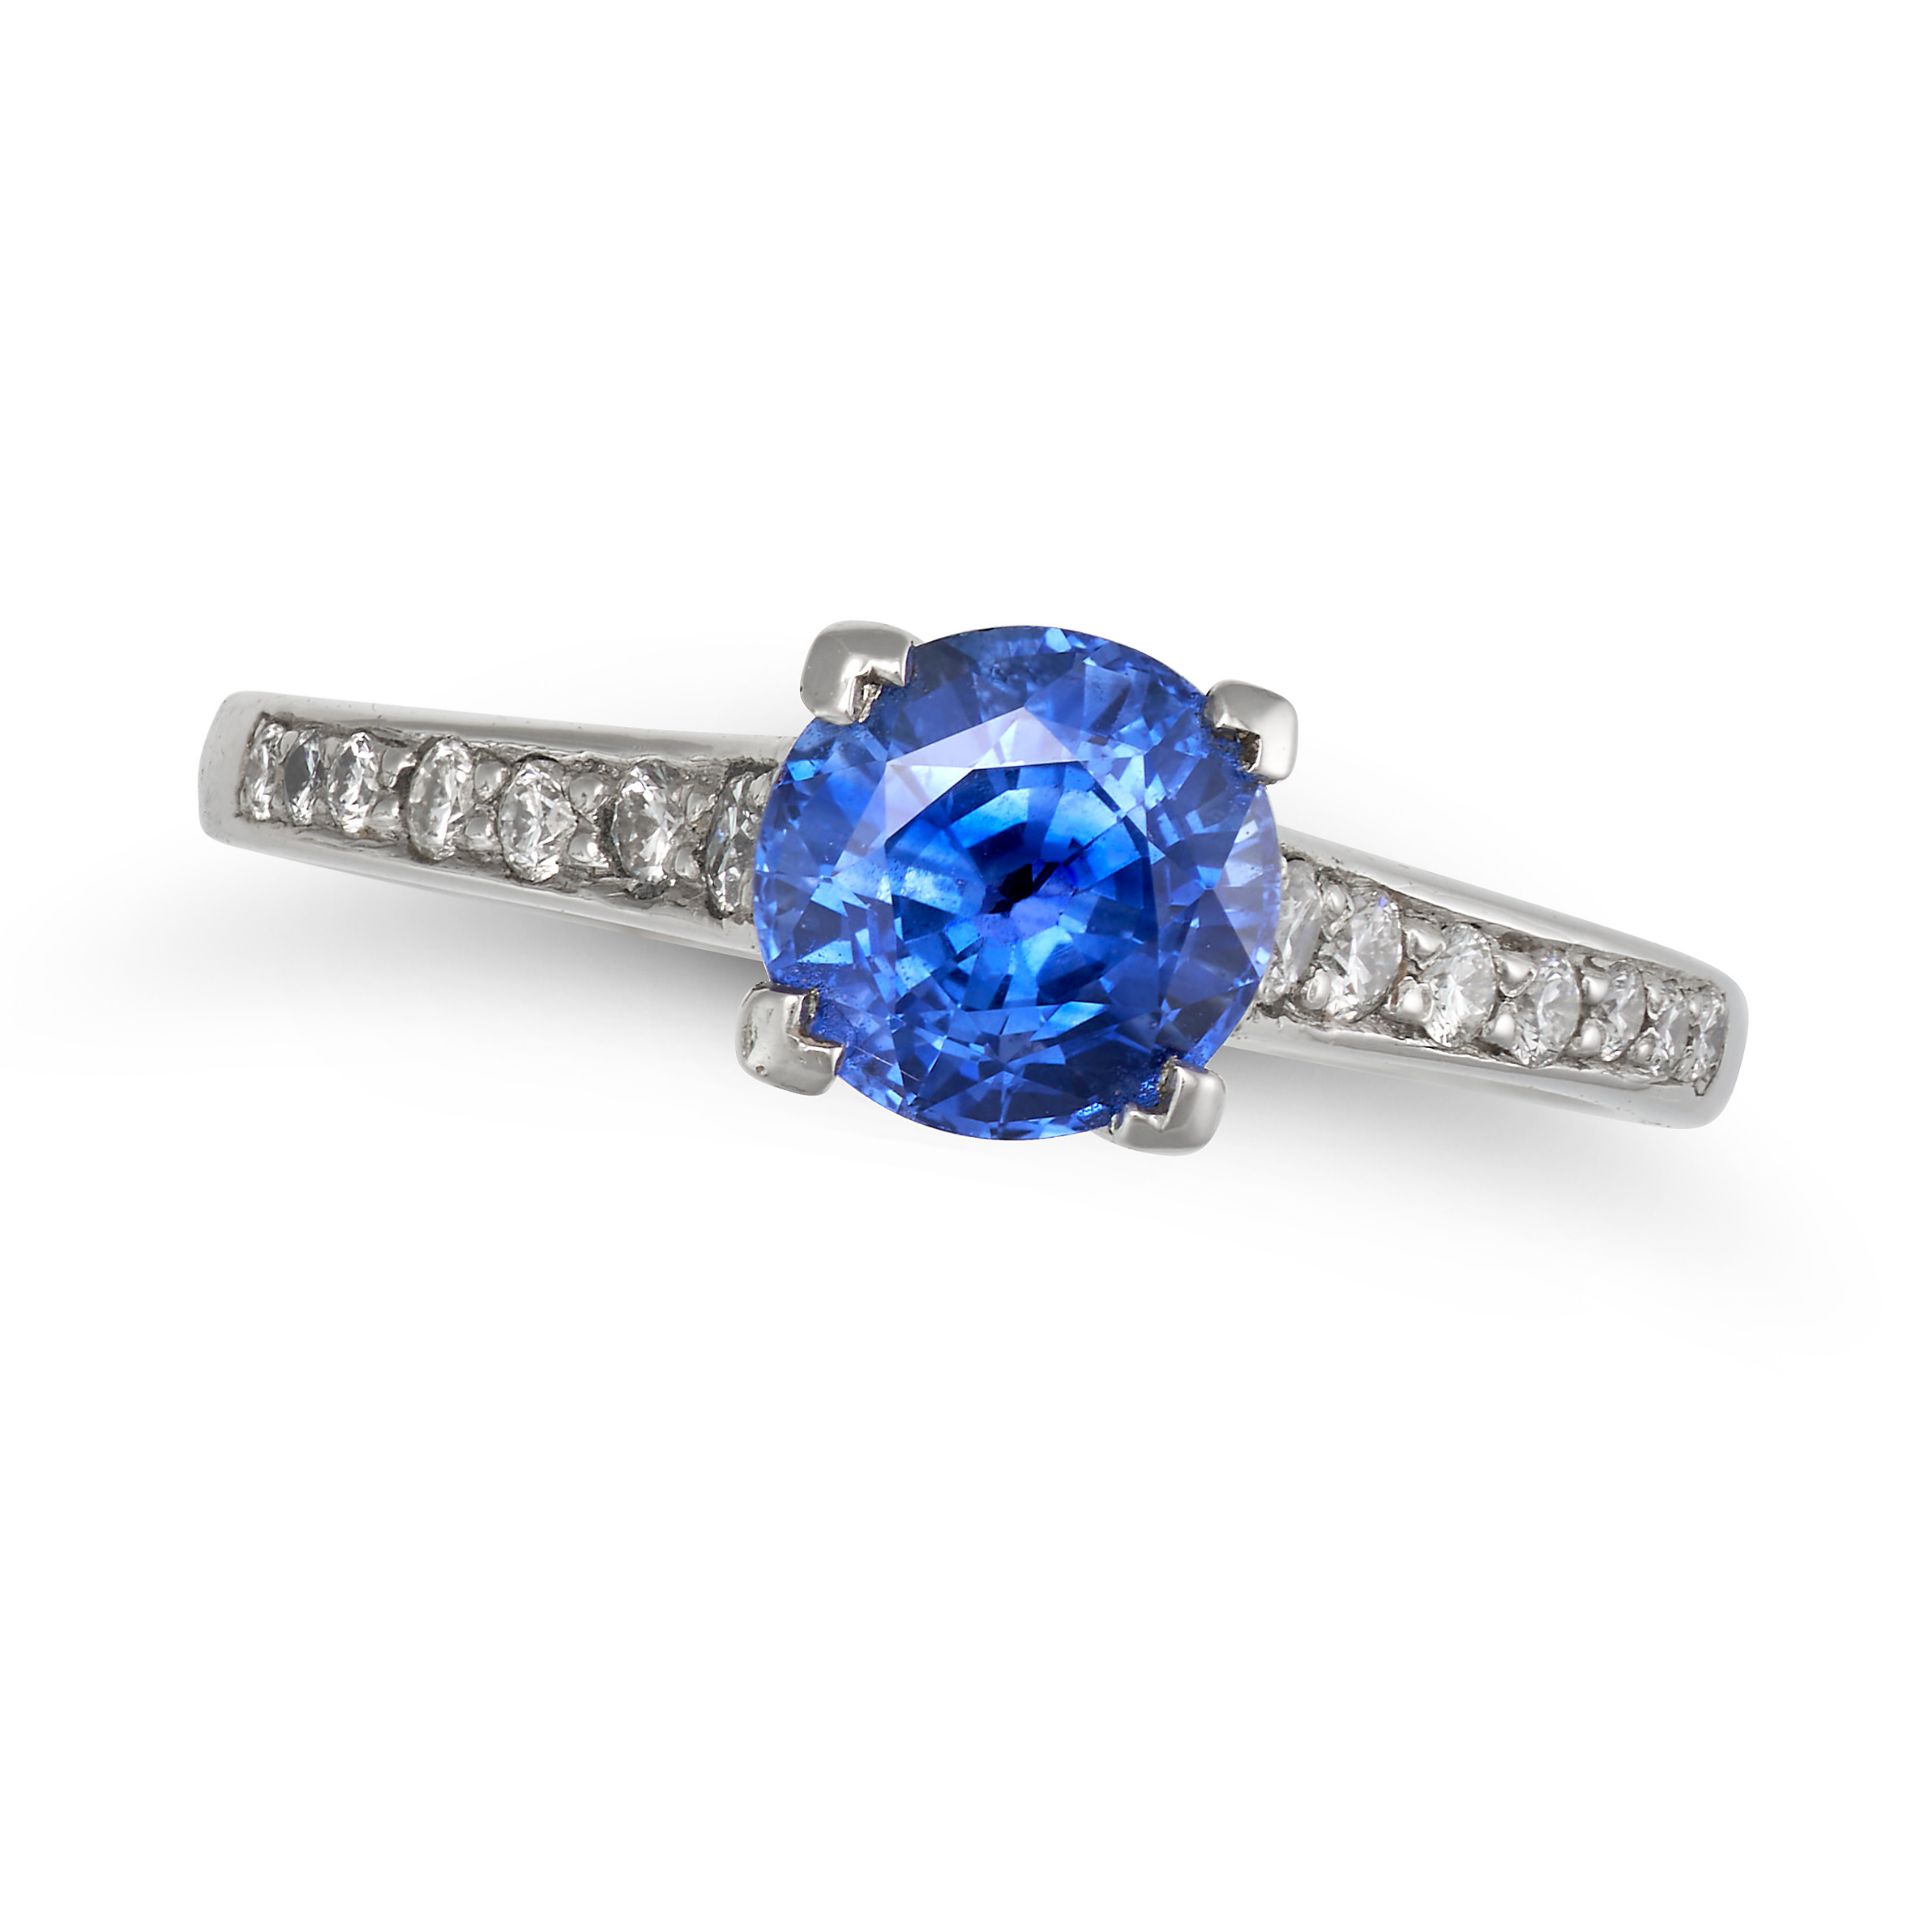 NO RESERVE - A SAPPHIRE AND DIAMOND RING in platinum, set with a round cut sapphire of 1.40 carat...